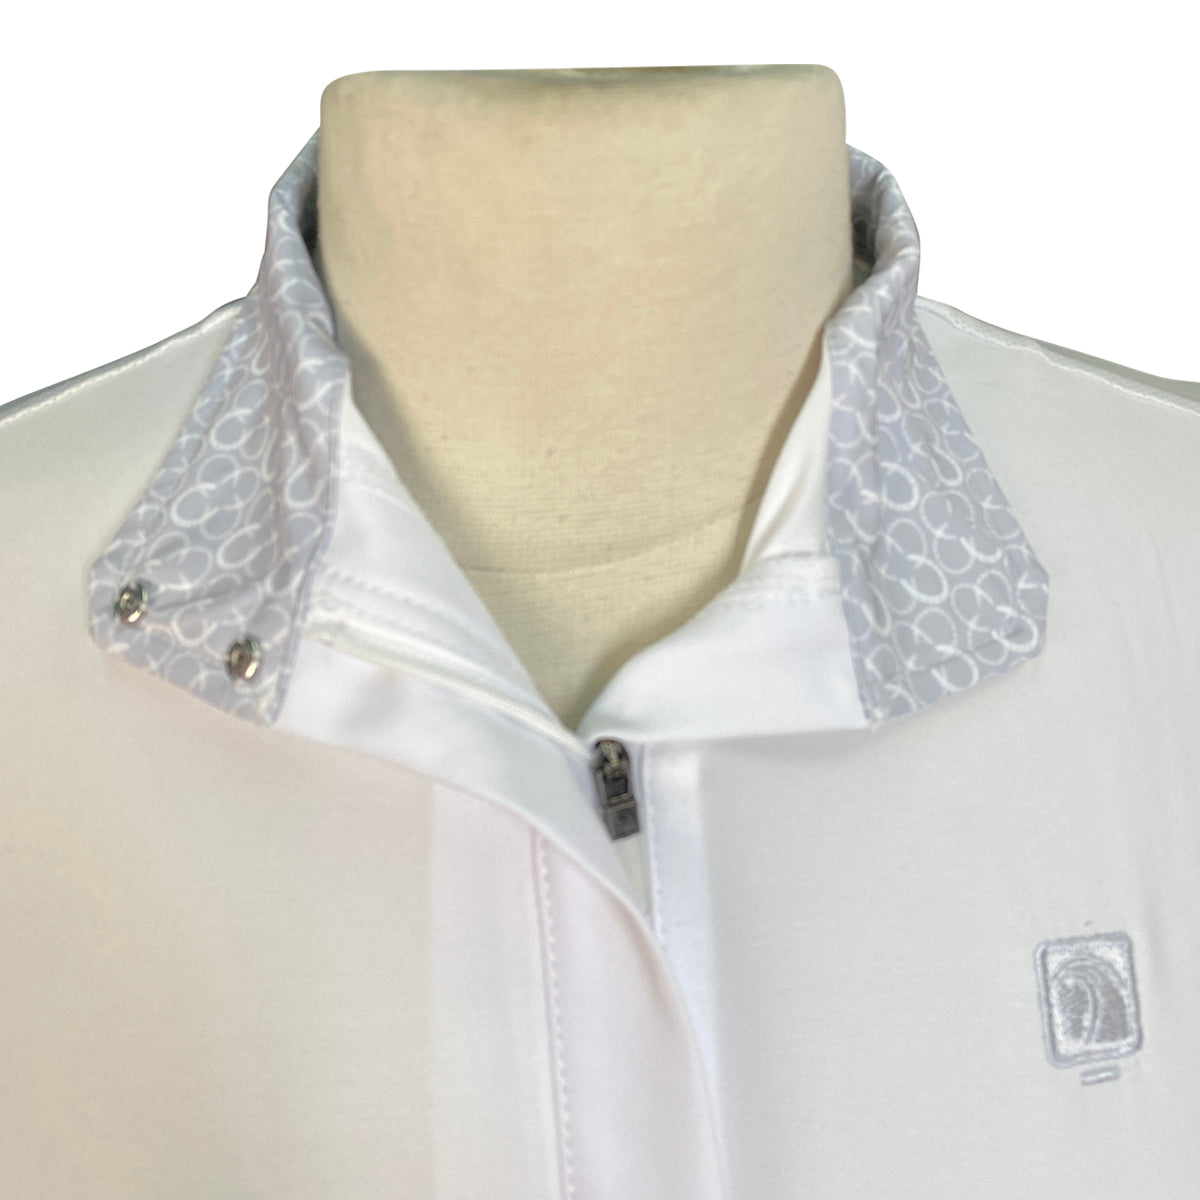 Romfh 'Lindsay' Chill Factor Show Shirt in Grey Horseshoes/White